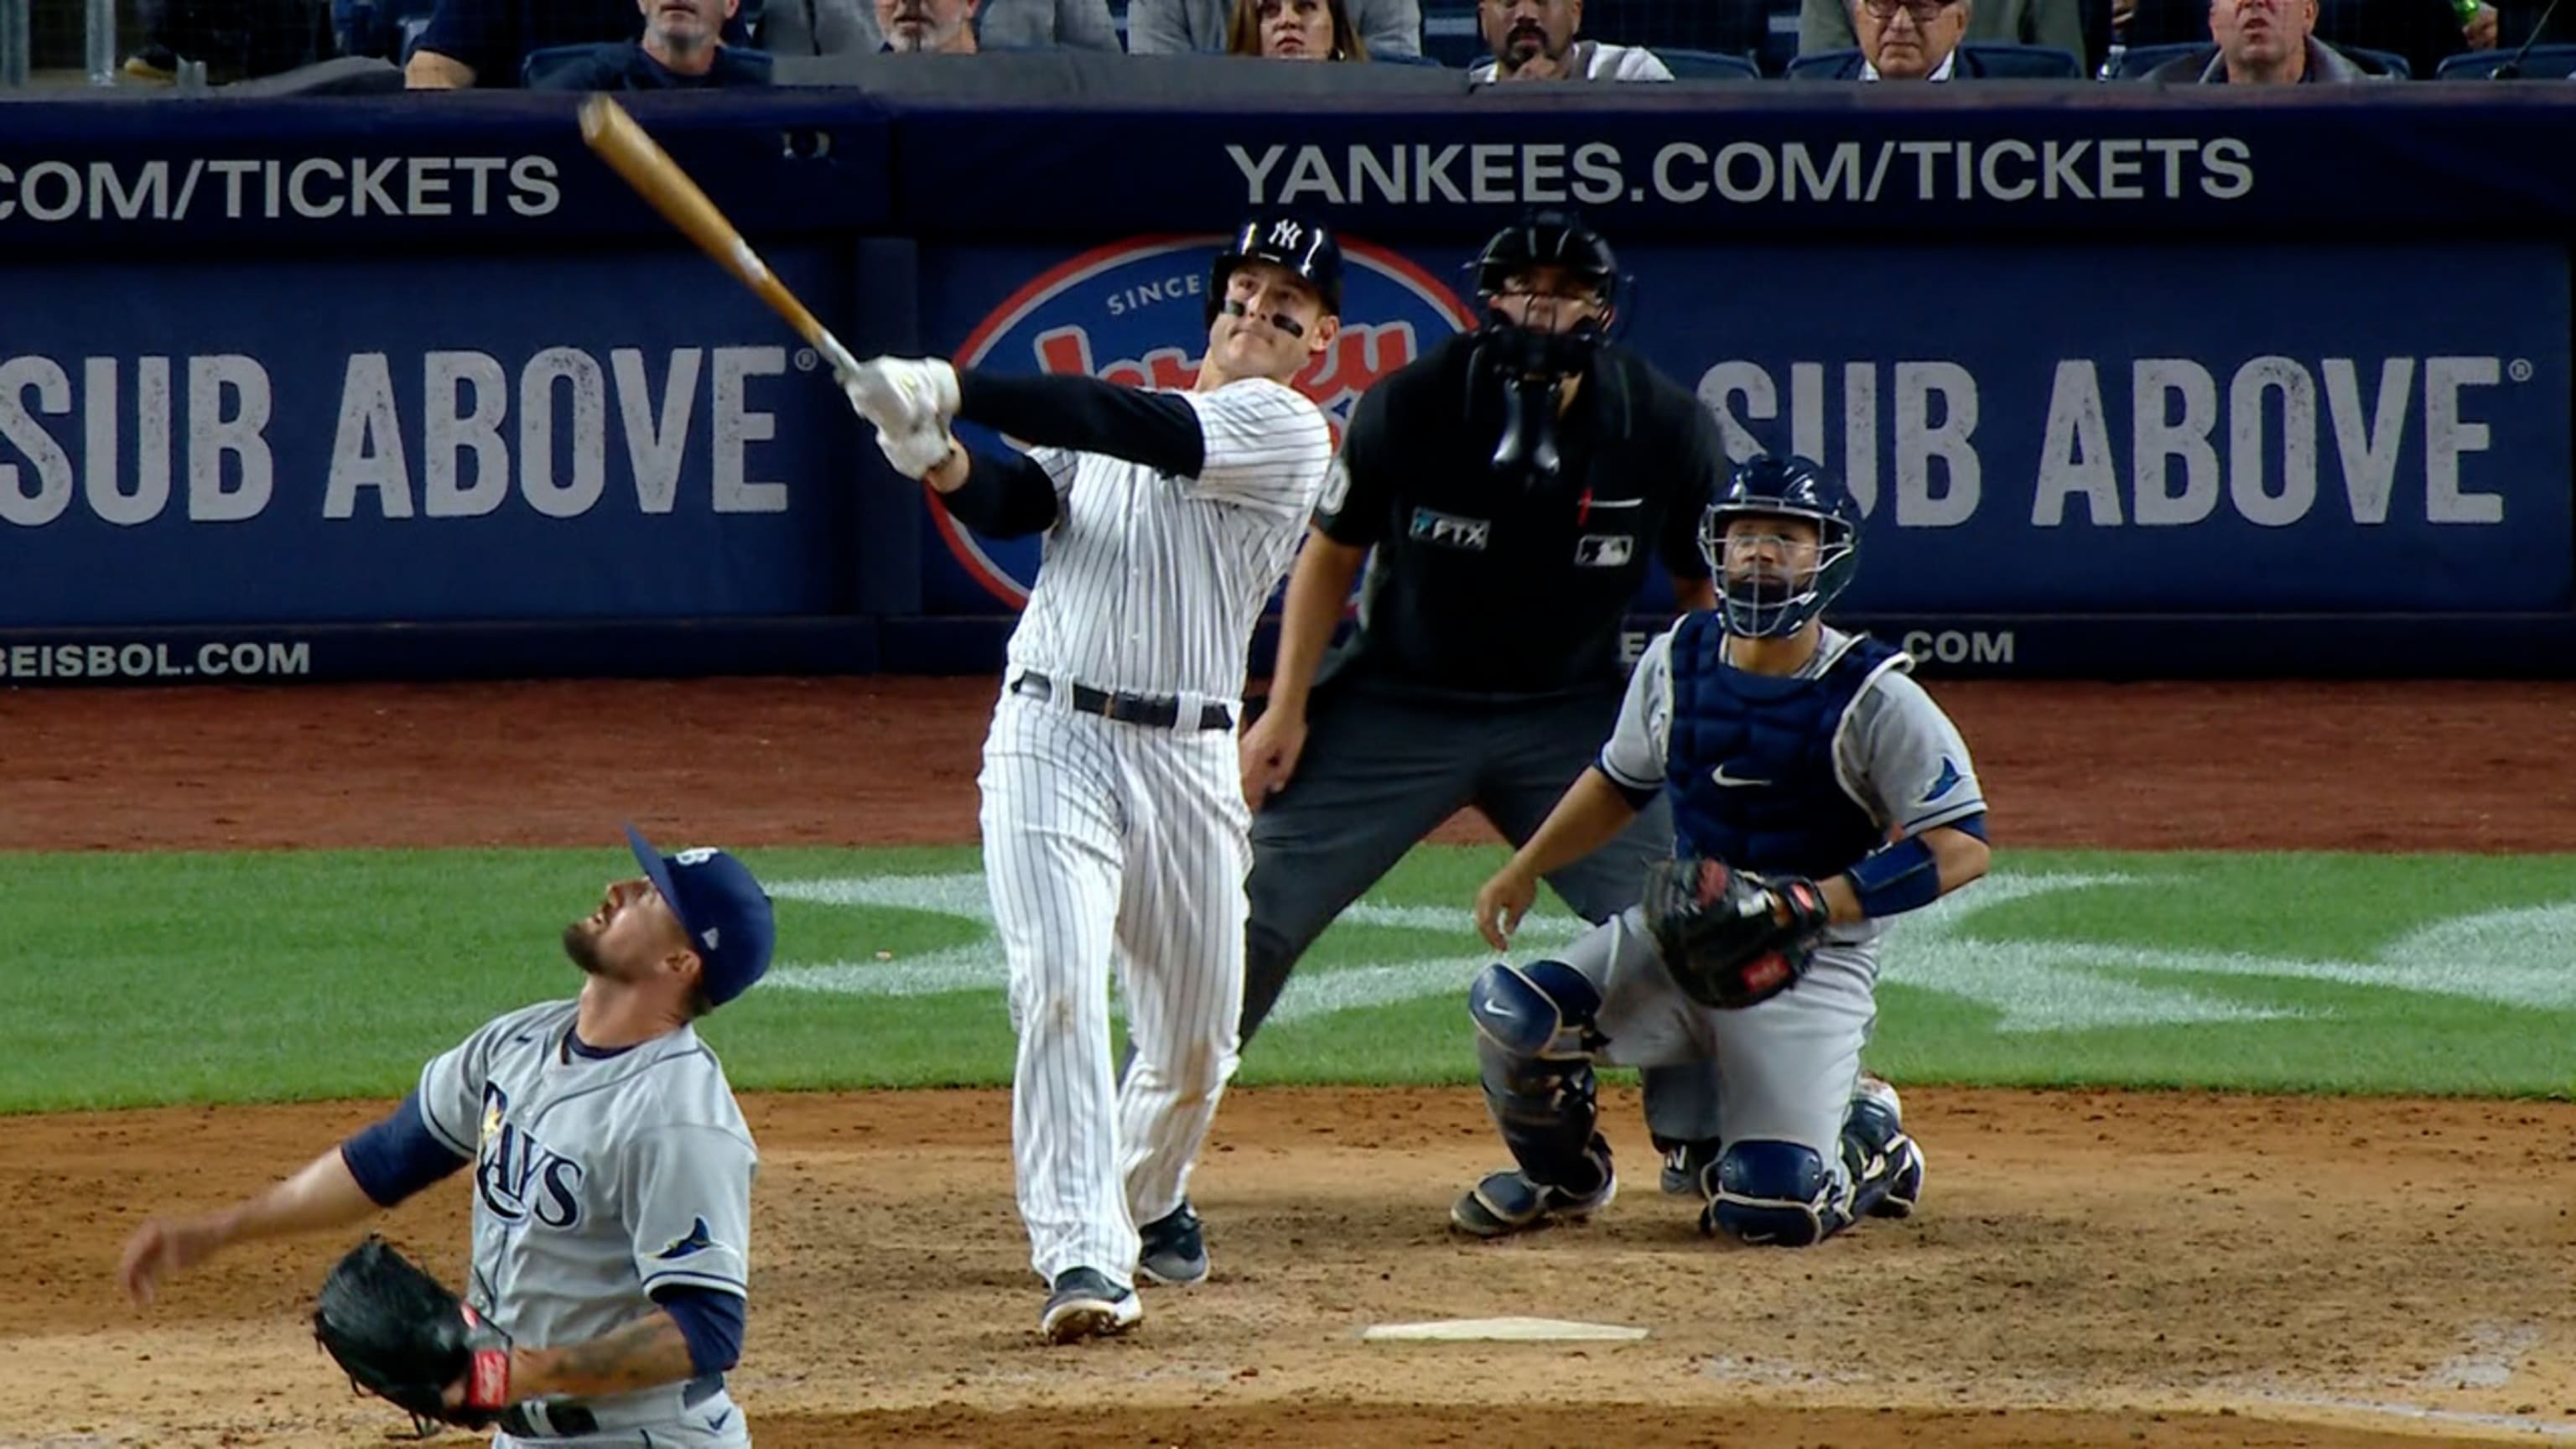 Anthony Rizzo's second homer of game gives Yankees victory over